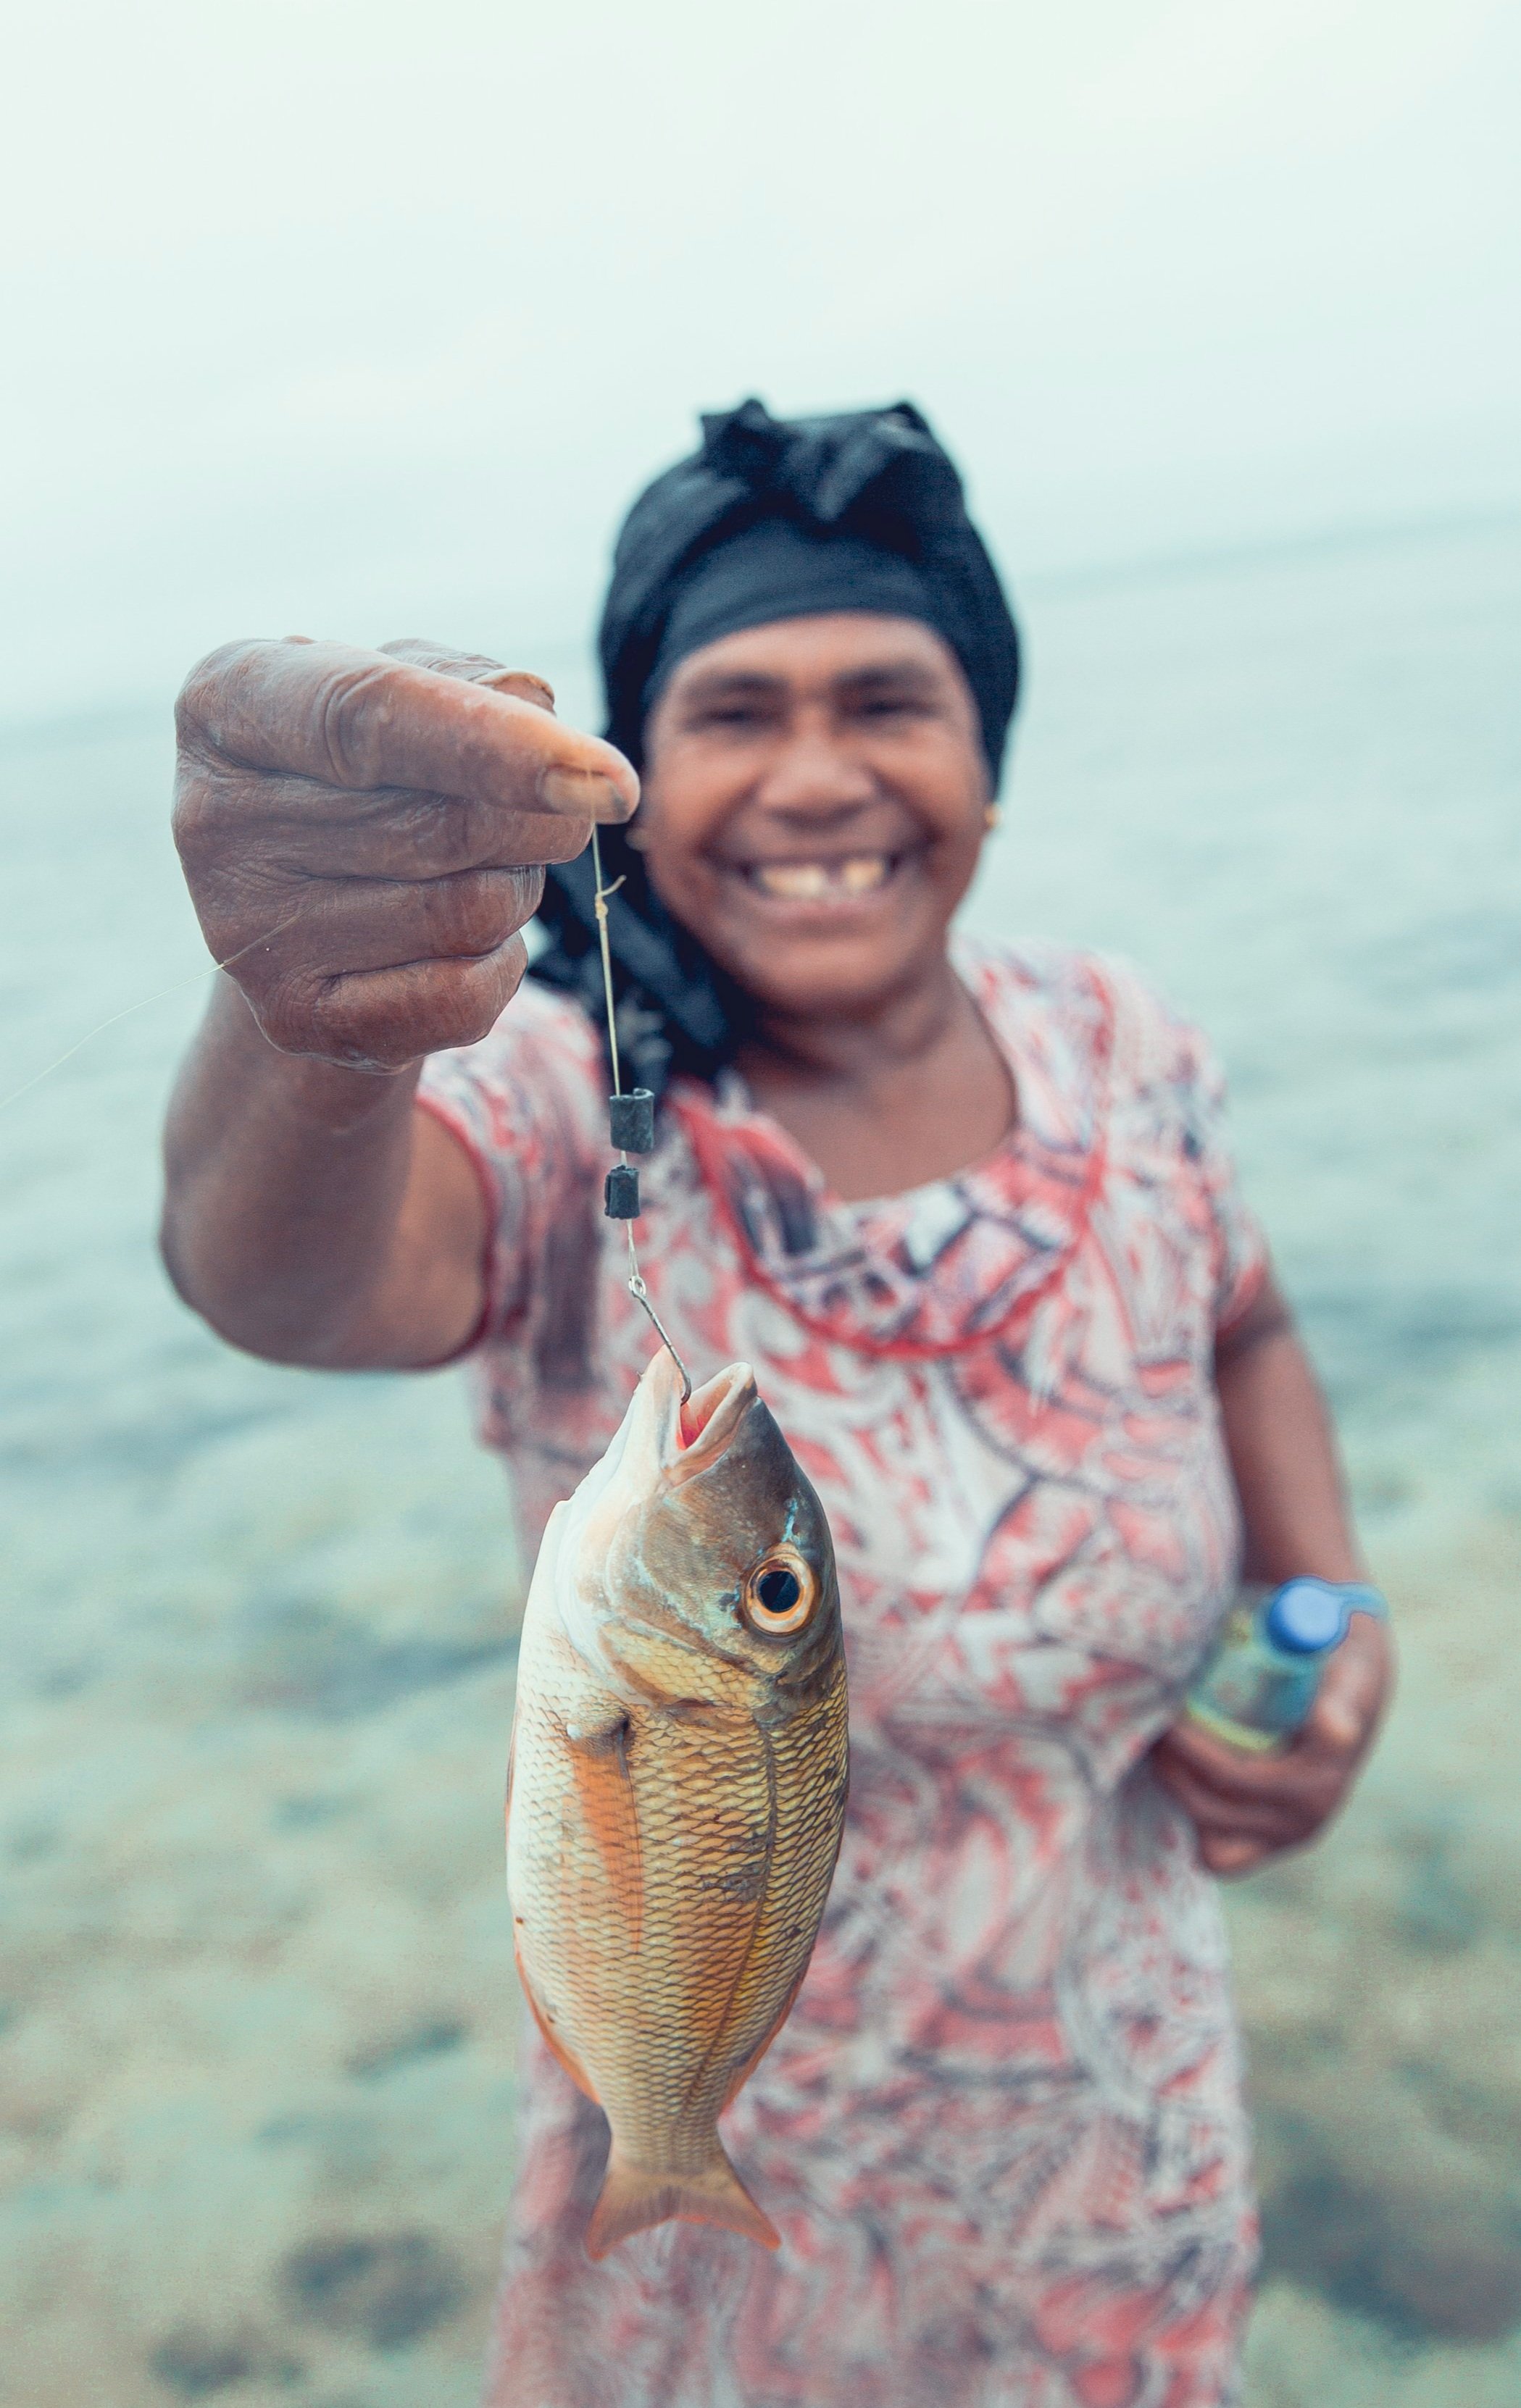 Call to Action from small-scale fisheries — Coalition for Fair